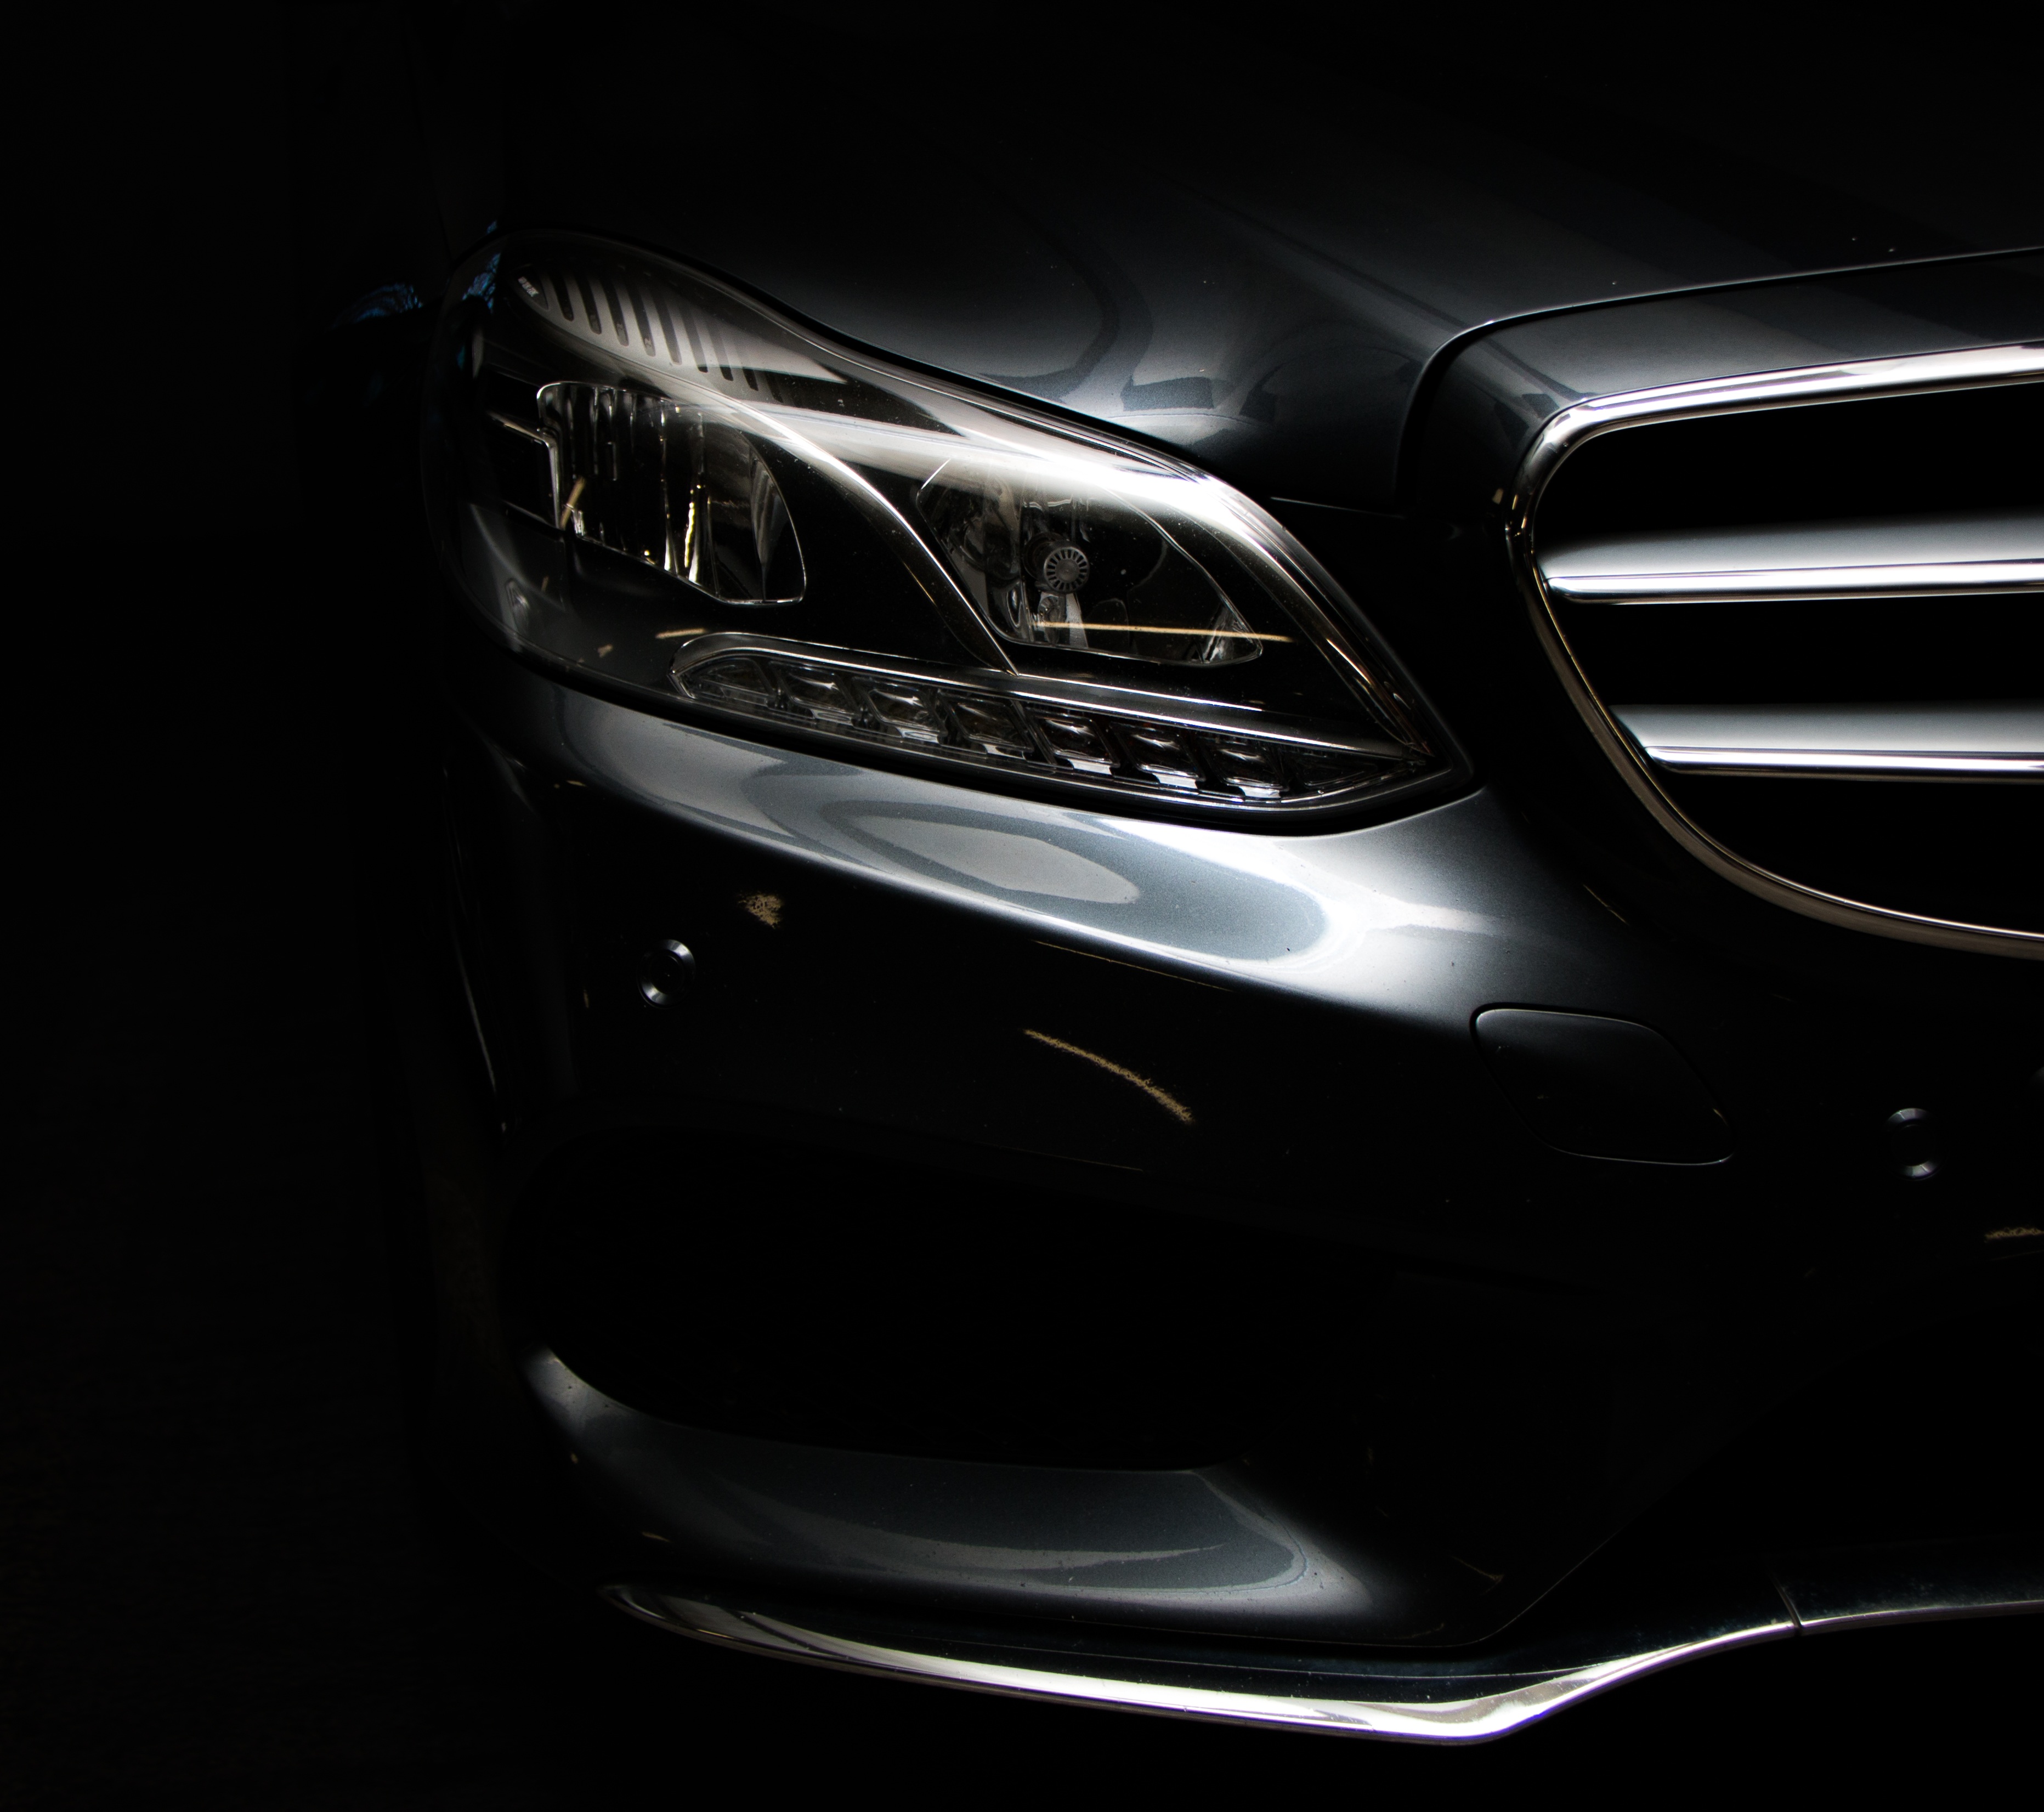 151032 Screensavers and Wallpapers Silver for phone. Download mercedes e-class, cars, dark, front view, mercedes, headlight, bumper, silver, silvery pictures for free